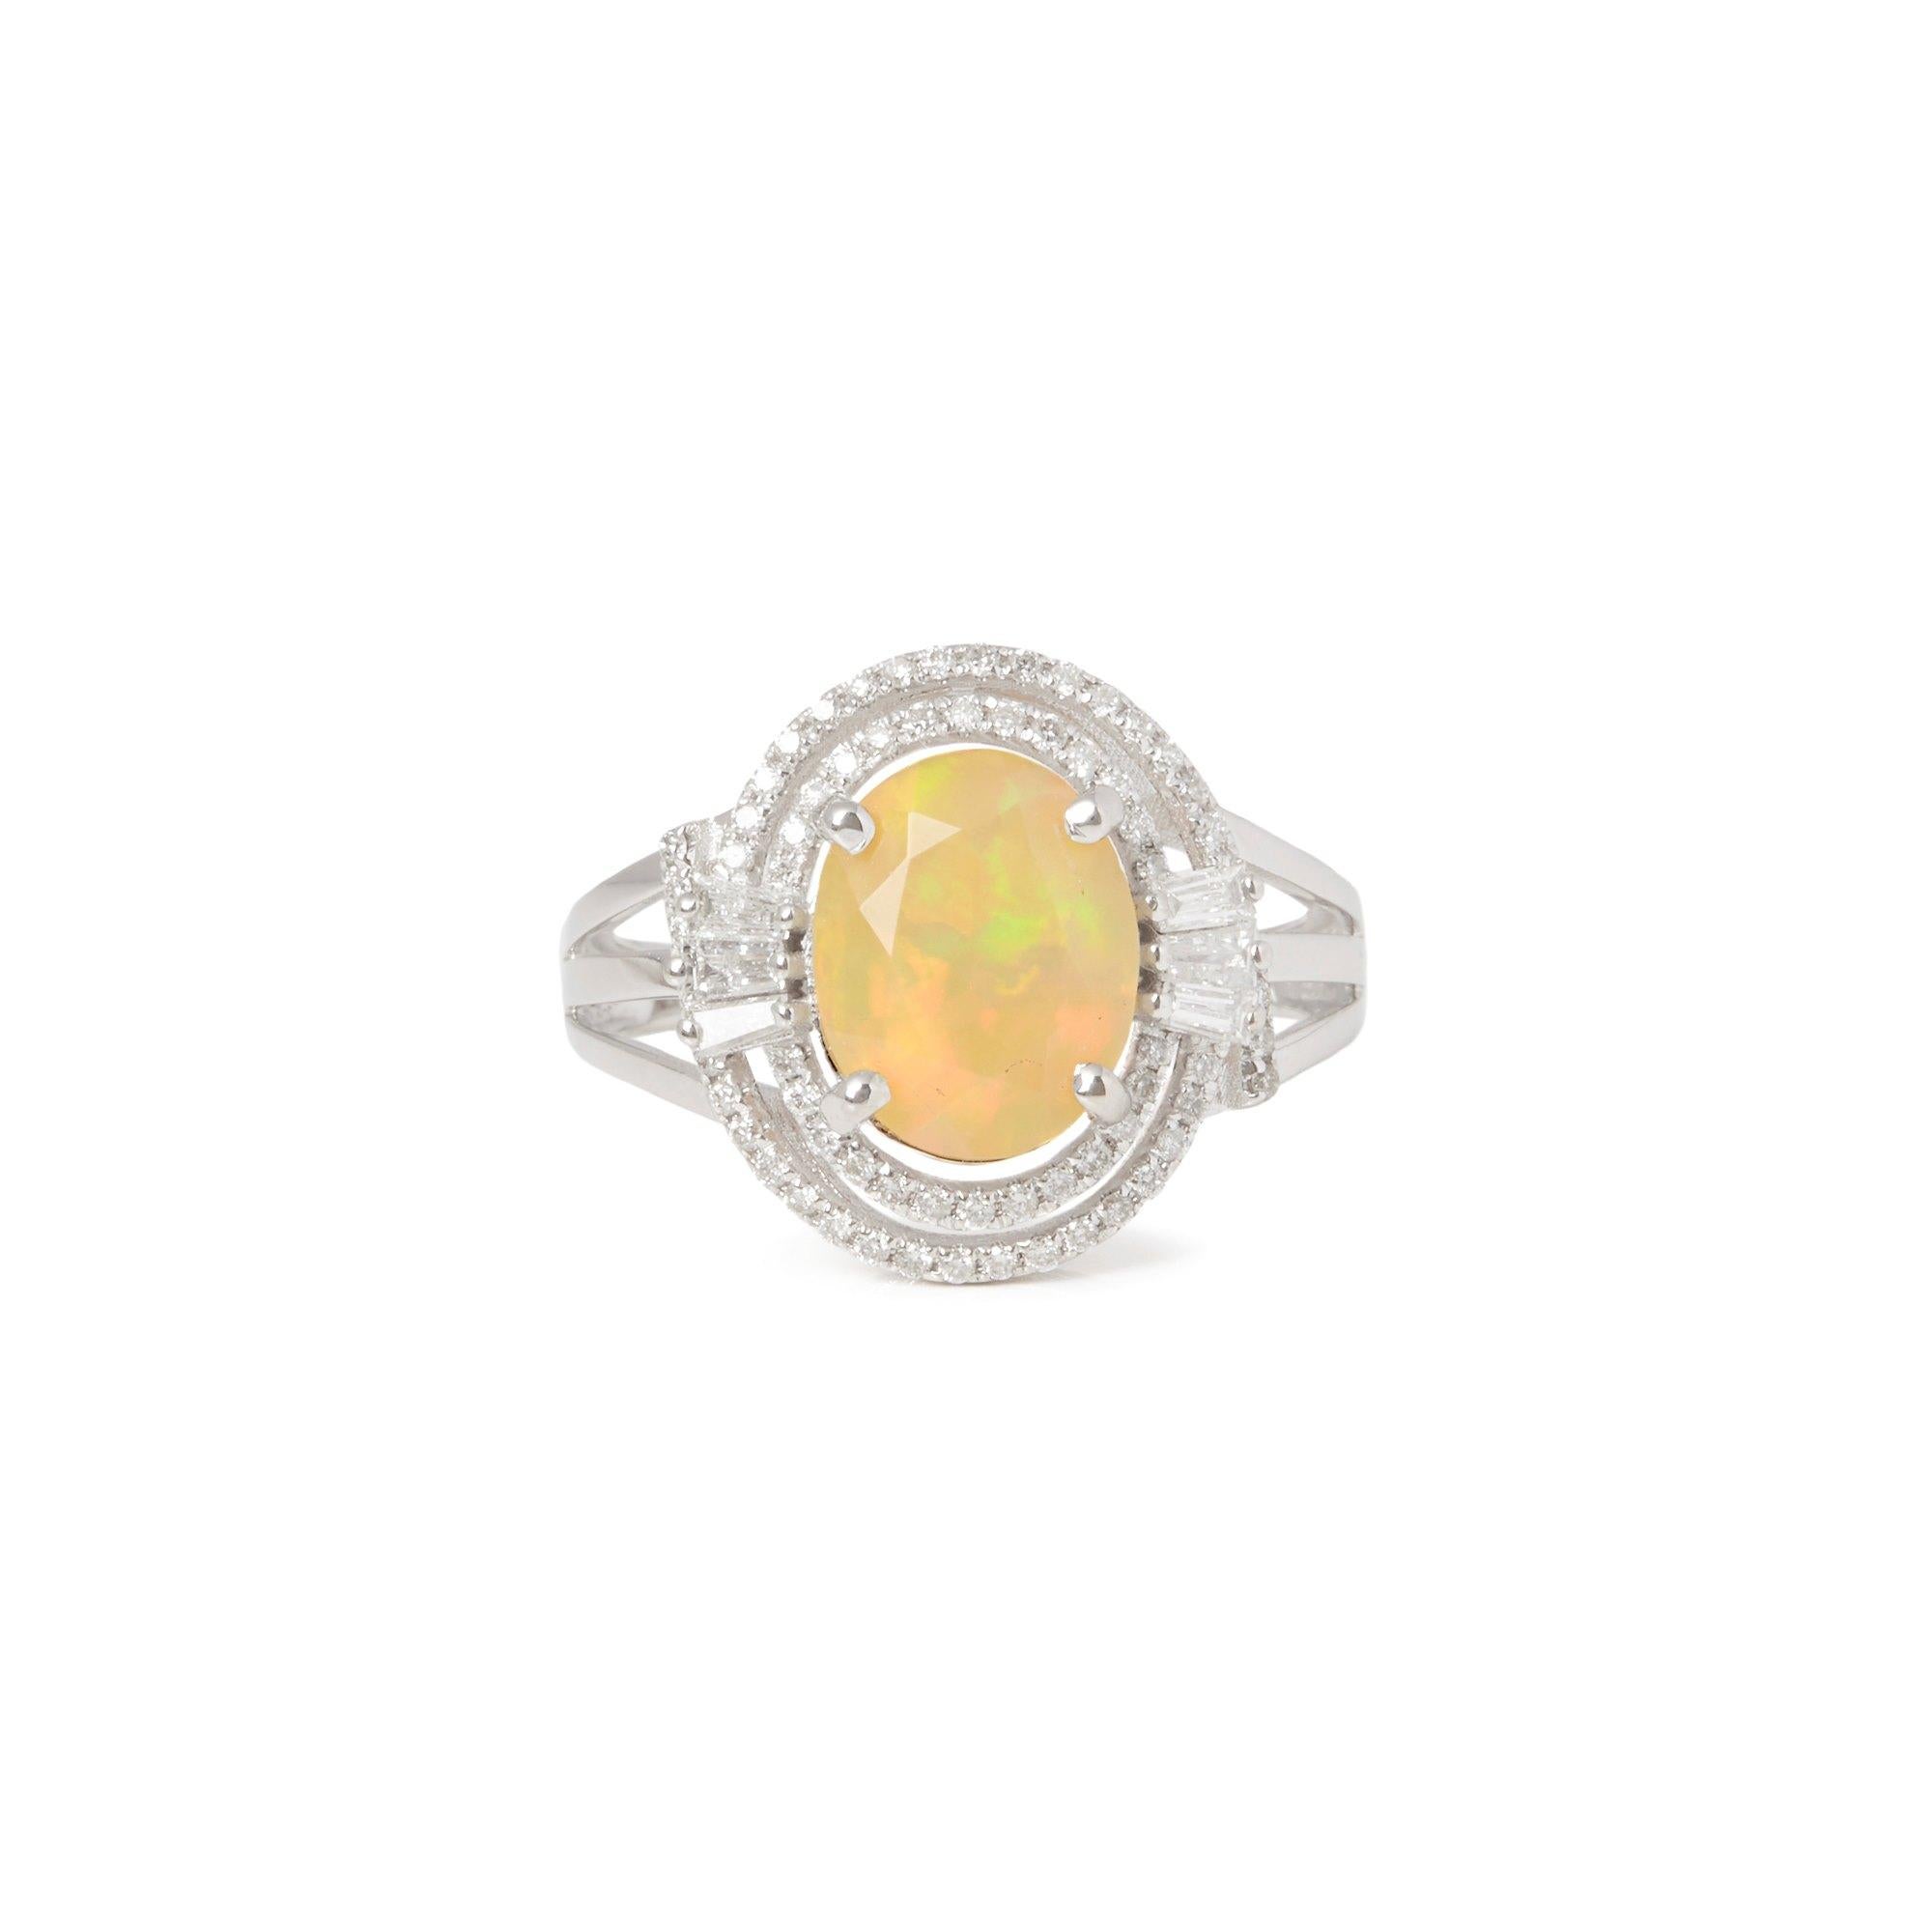 This Ring Designed by David Jerome is from his Private Collection and features One Oval Cut Opal Totalling 1.89cts Sourced in Ethiopia. Set with Round Brilliant Cut Diamonds Totalling 0.49cts Mounted in an 18k White Gold Setting. Finger Size UK N